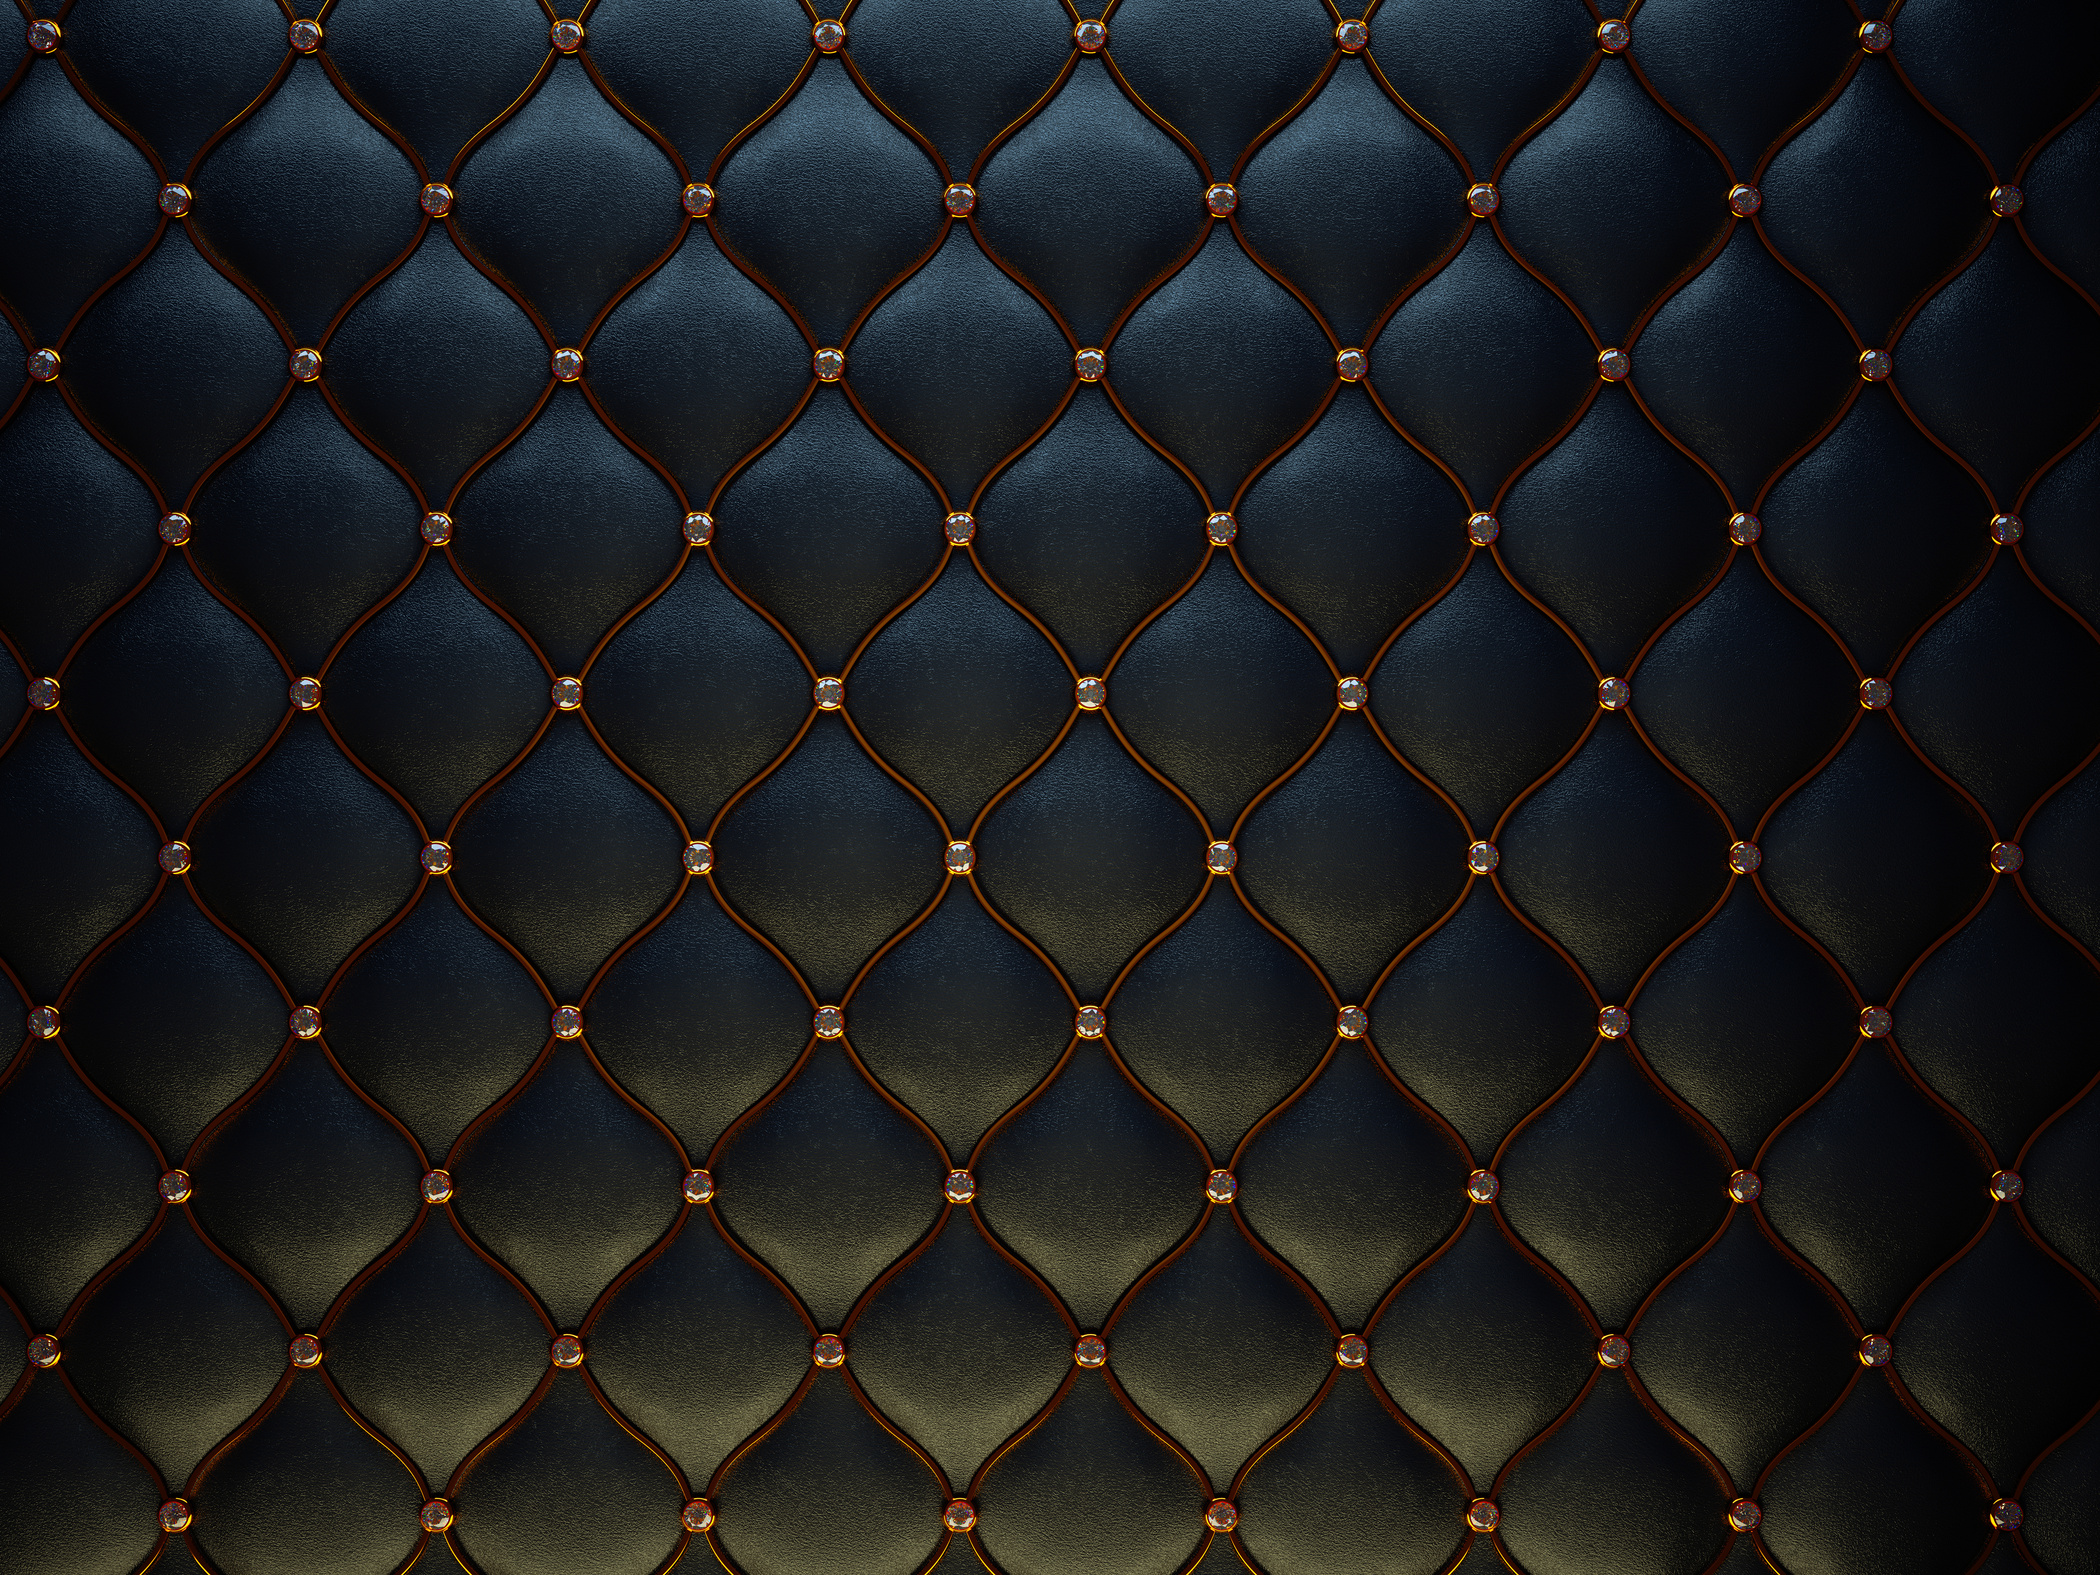 Black Leather Pattern with Golden Wire and Diamonds